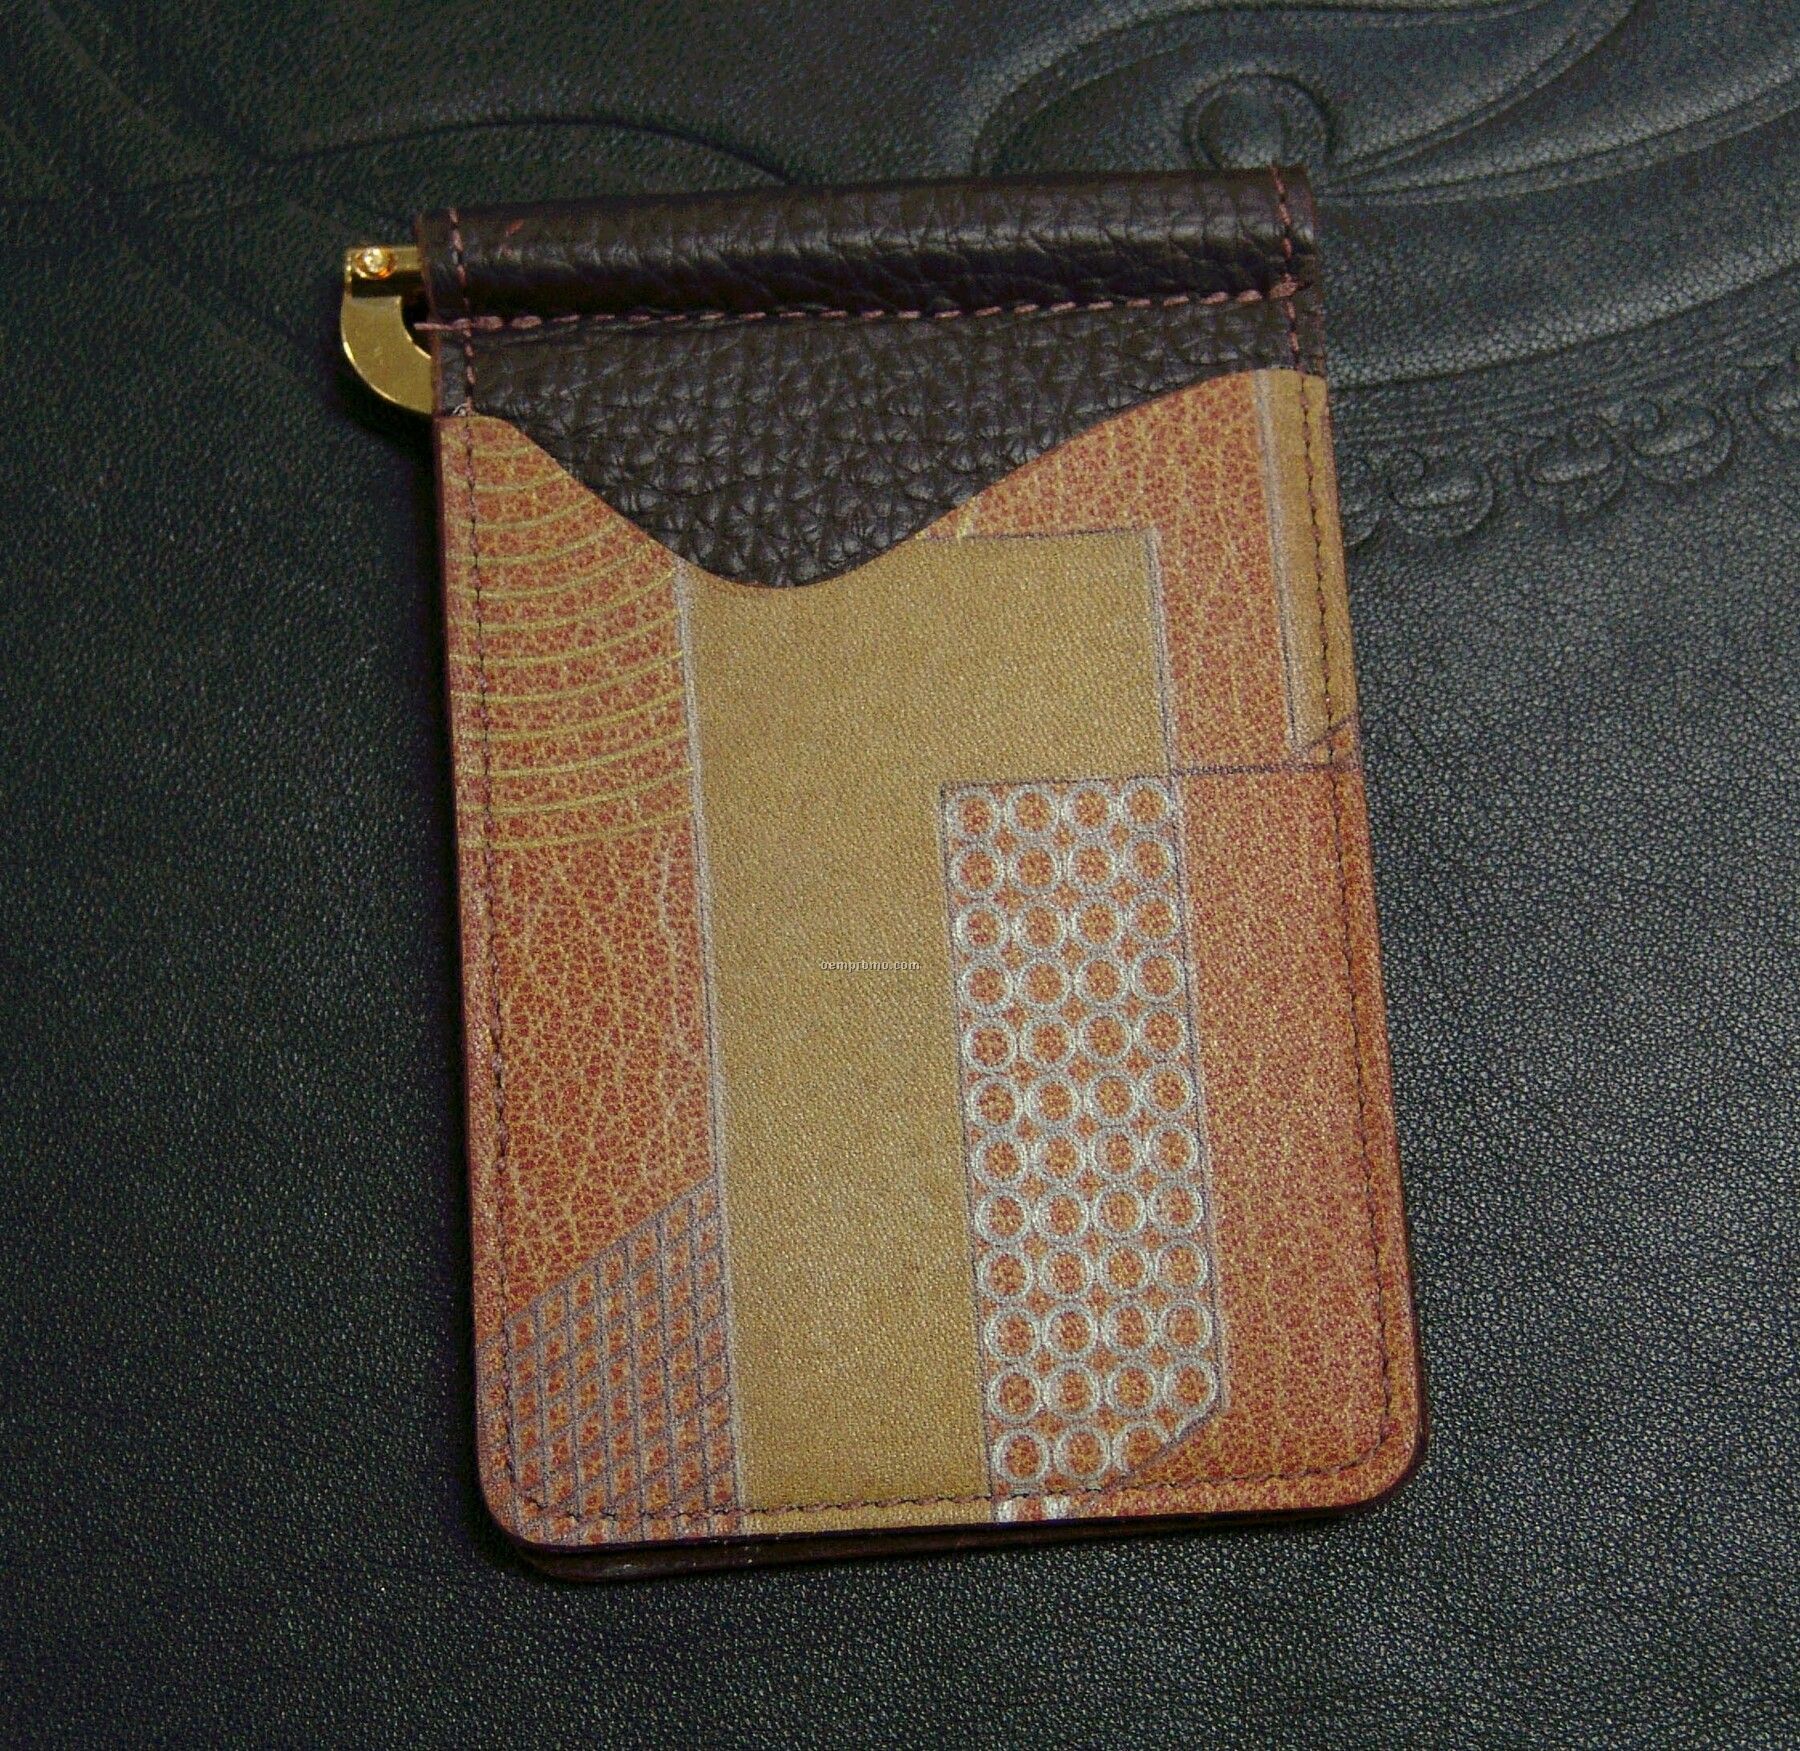 Leather Money Clip Wallet With 4-color Print On Leather